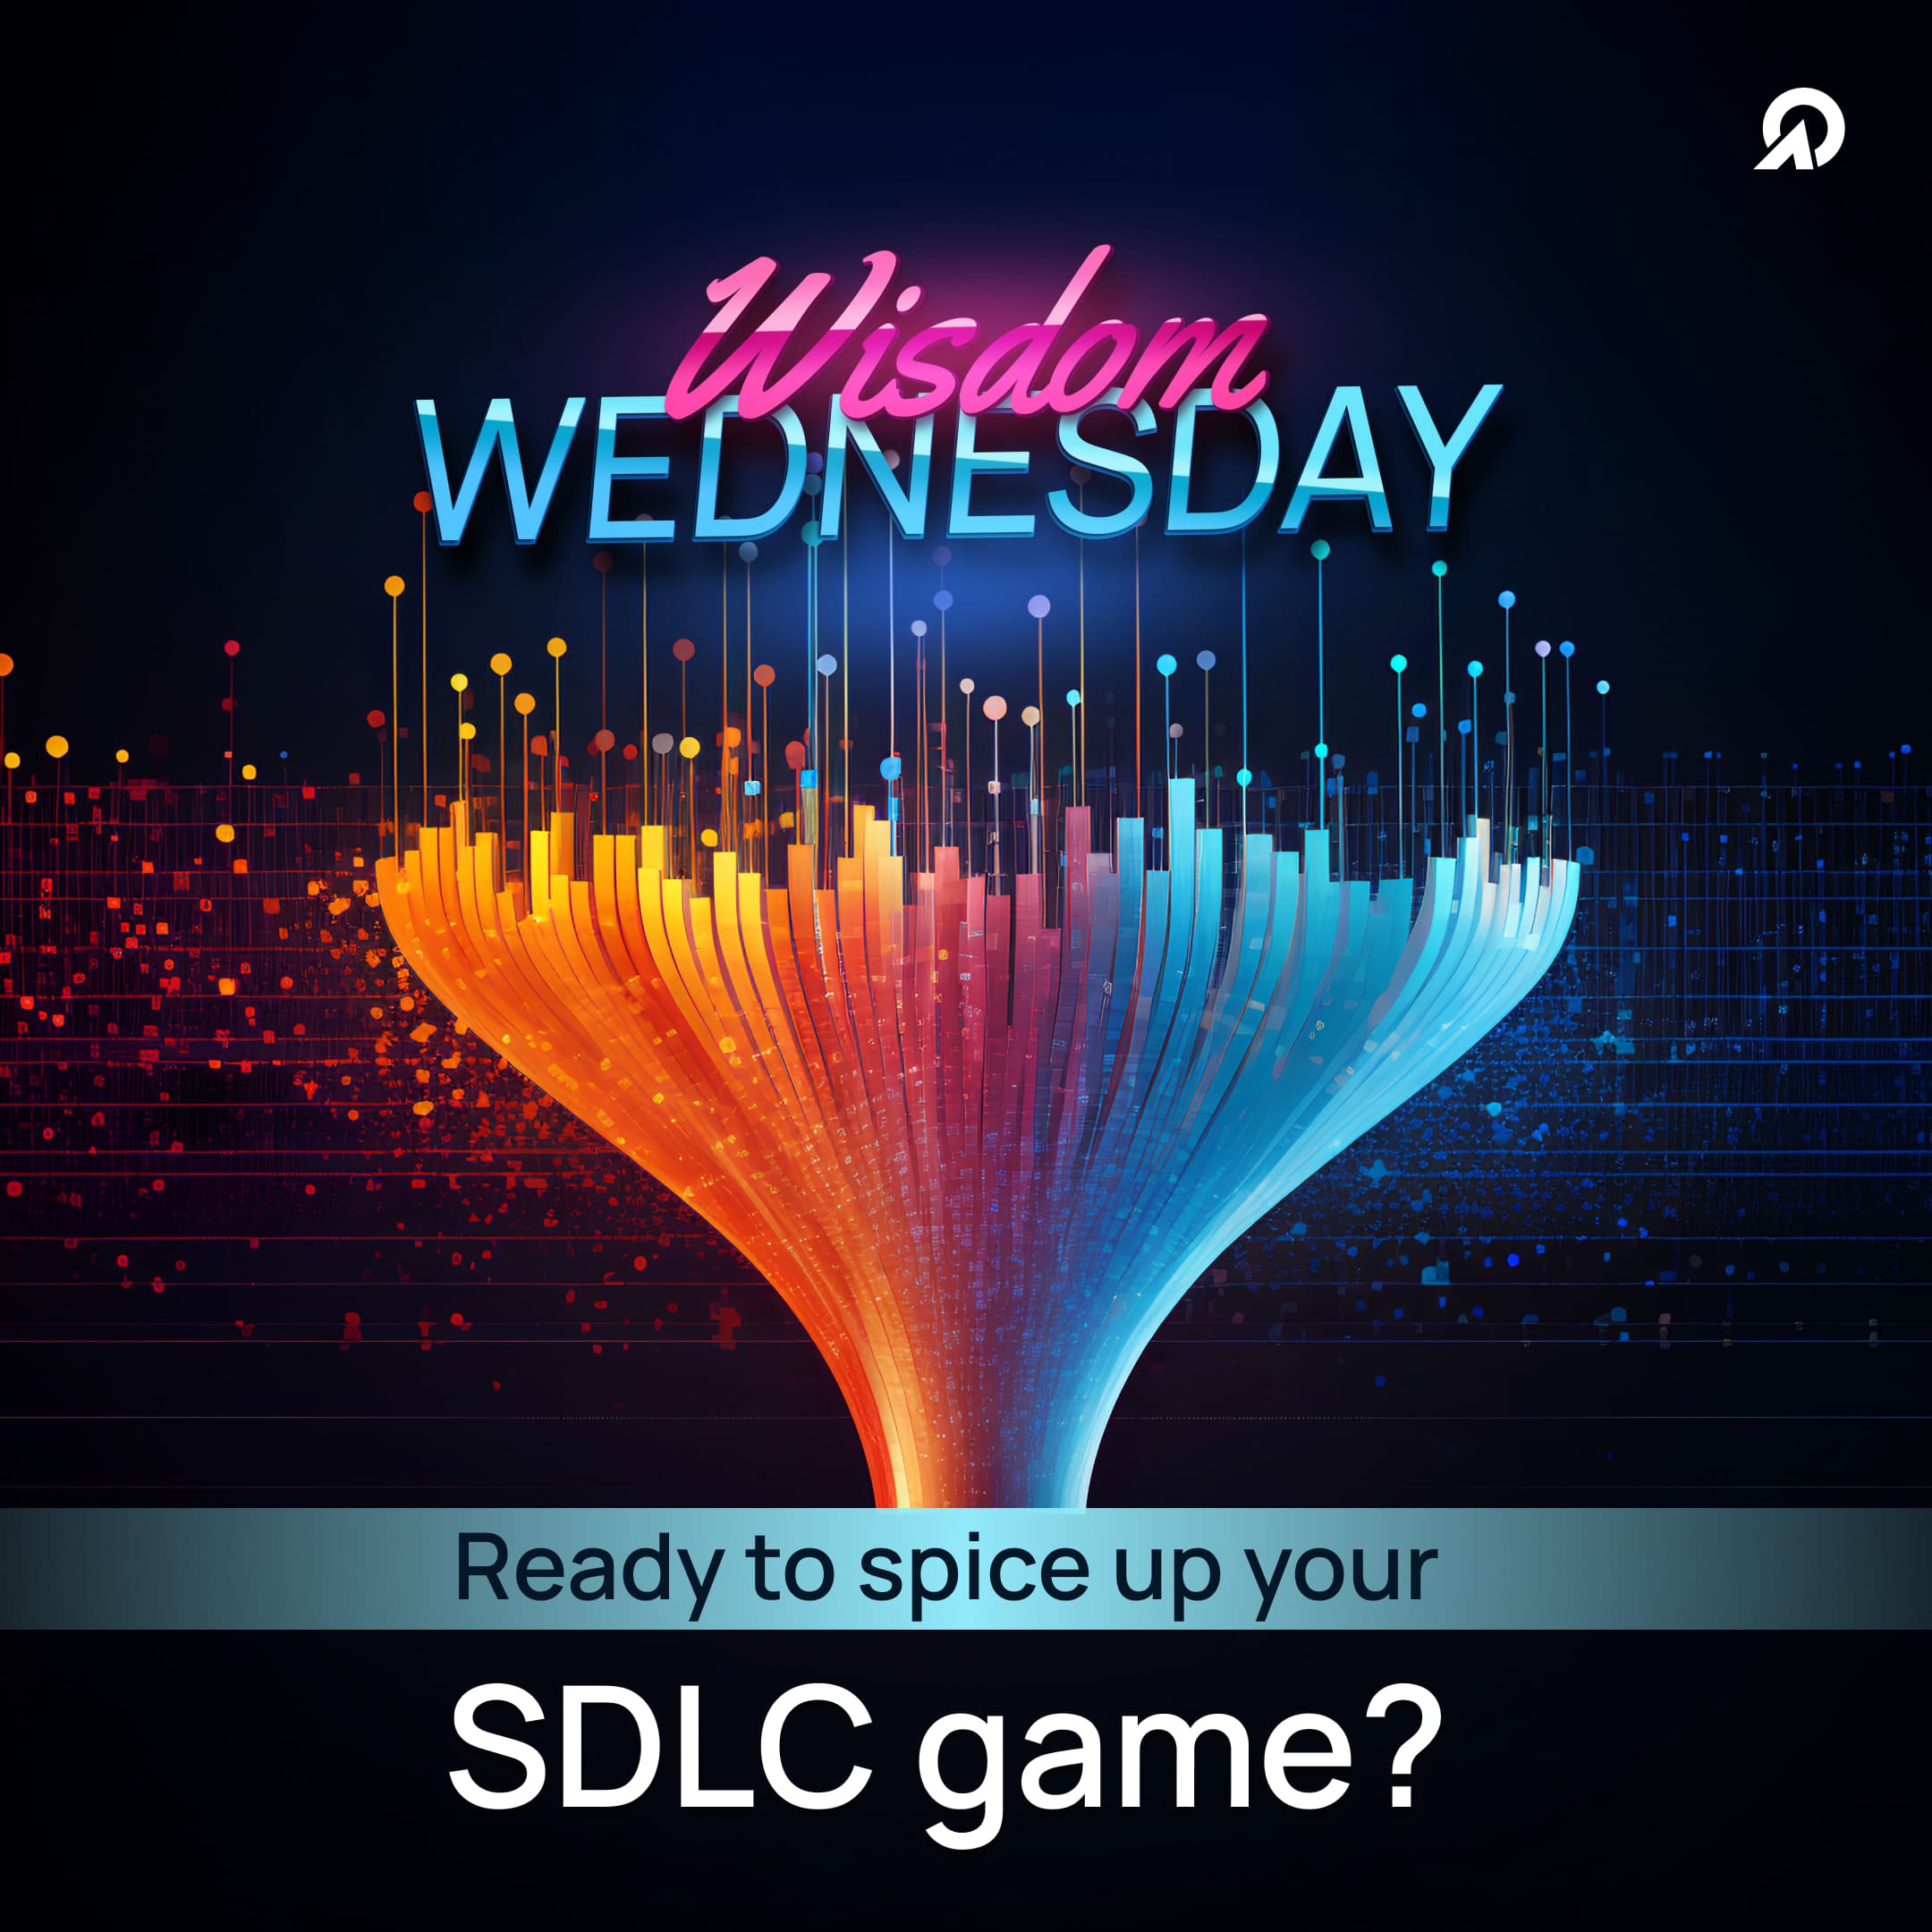 Ready To Spice Up Your SDLC Game